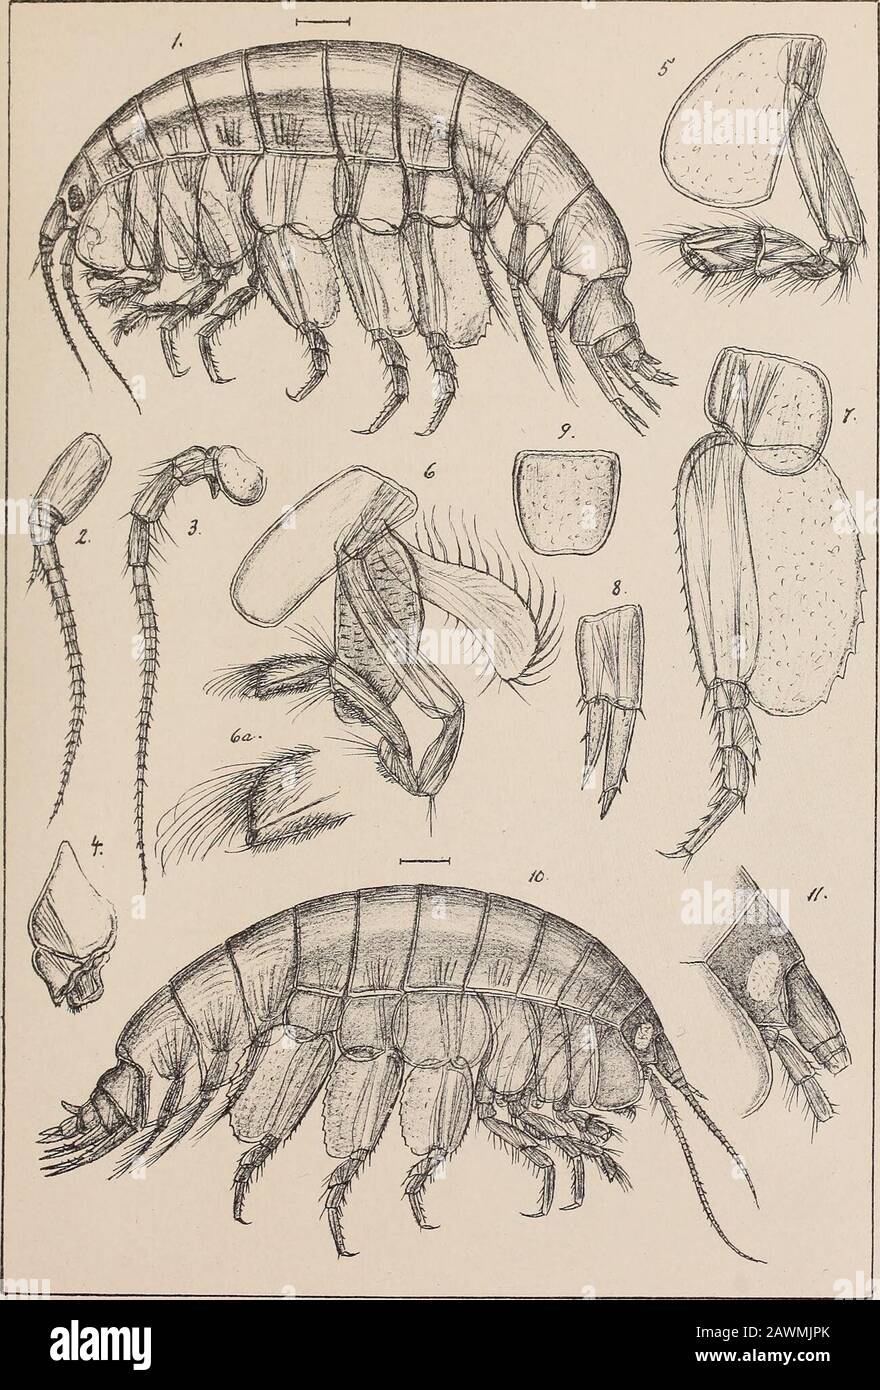 The Norwegian North polar expedition, 1893-1896; scientific results . G-O.Sars autogr. Irykt i den priv.Opma^ling Chr. PLATE VI. PLATE VI. Pseudalihrotus glacialis, G. 0. Sars. Fig. 1. Adult female of the normal form, viewed from left side. — 2. Superior antenna — 3. Inferior antenna. — i. Anterior lip with epistome, viewed from left side. — .5. Anterior gnathopod. — 6. Posterior gnathopod, with branchial lamella and incubatory plate. — 6a. Same, extremity of propodos, more highly magnified. — 7. Last pereiopod. — 8. Last uropod. — 9. Telson. — 10. Adult female of the variety leucopis, viewed Stock Photo